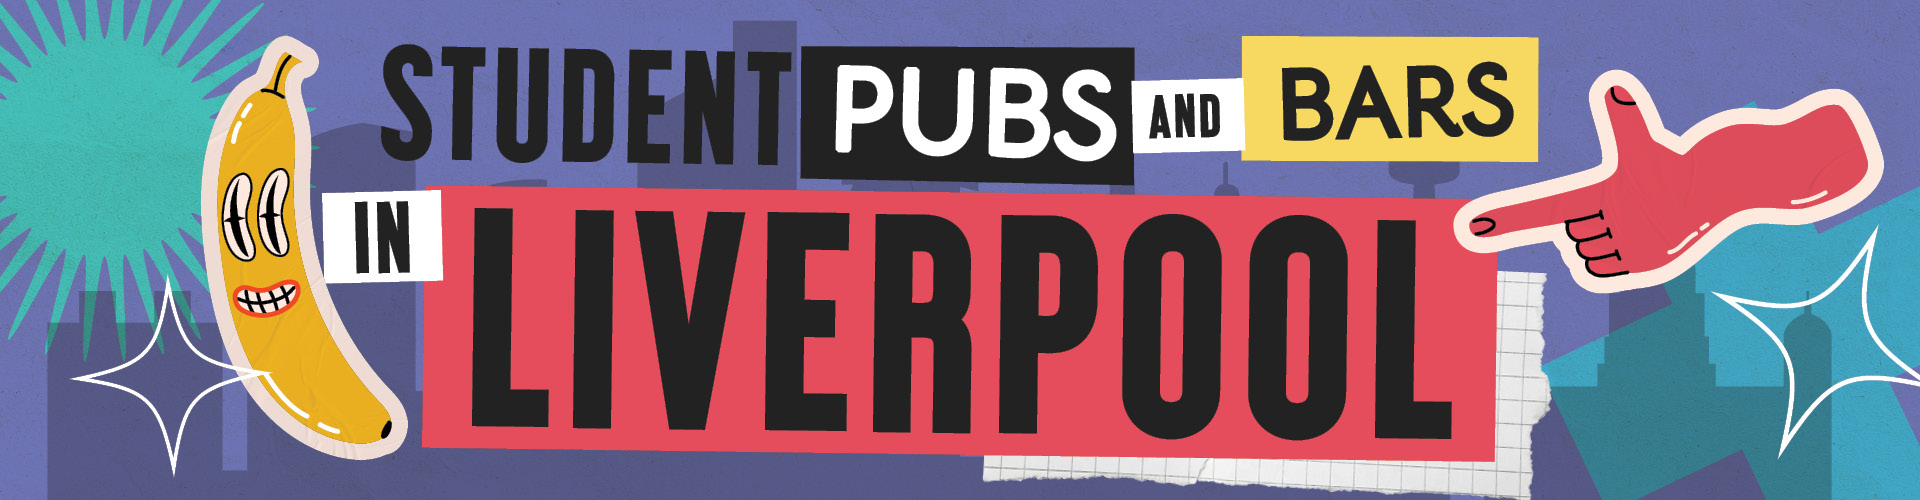 Student pubs and bars in Liverpool